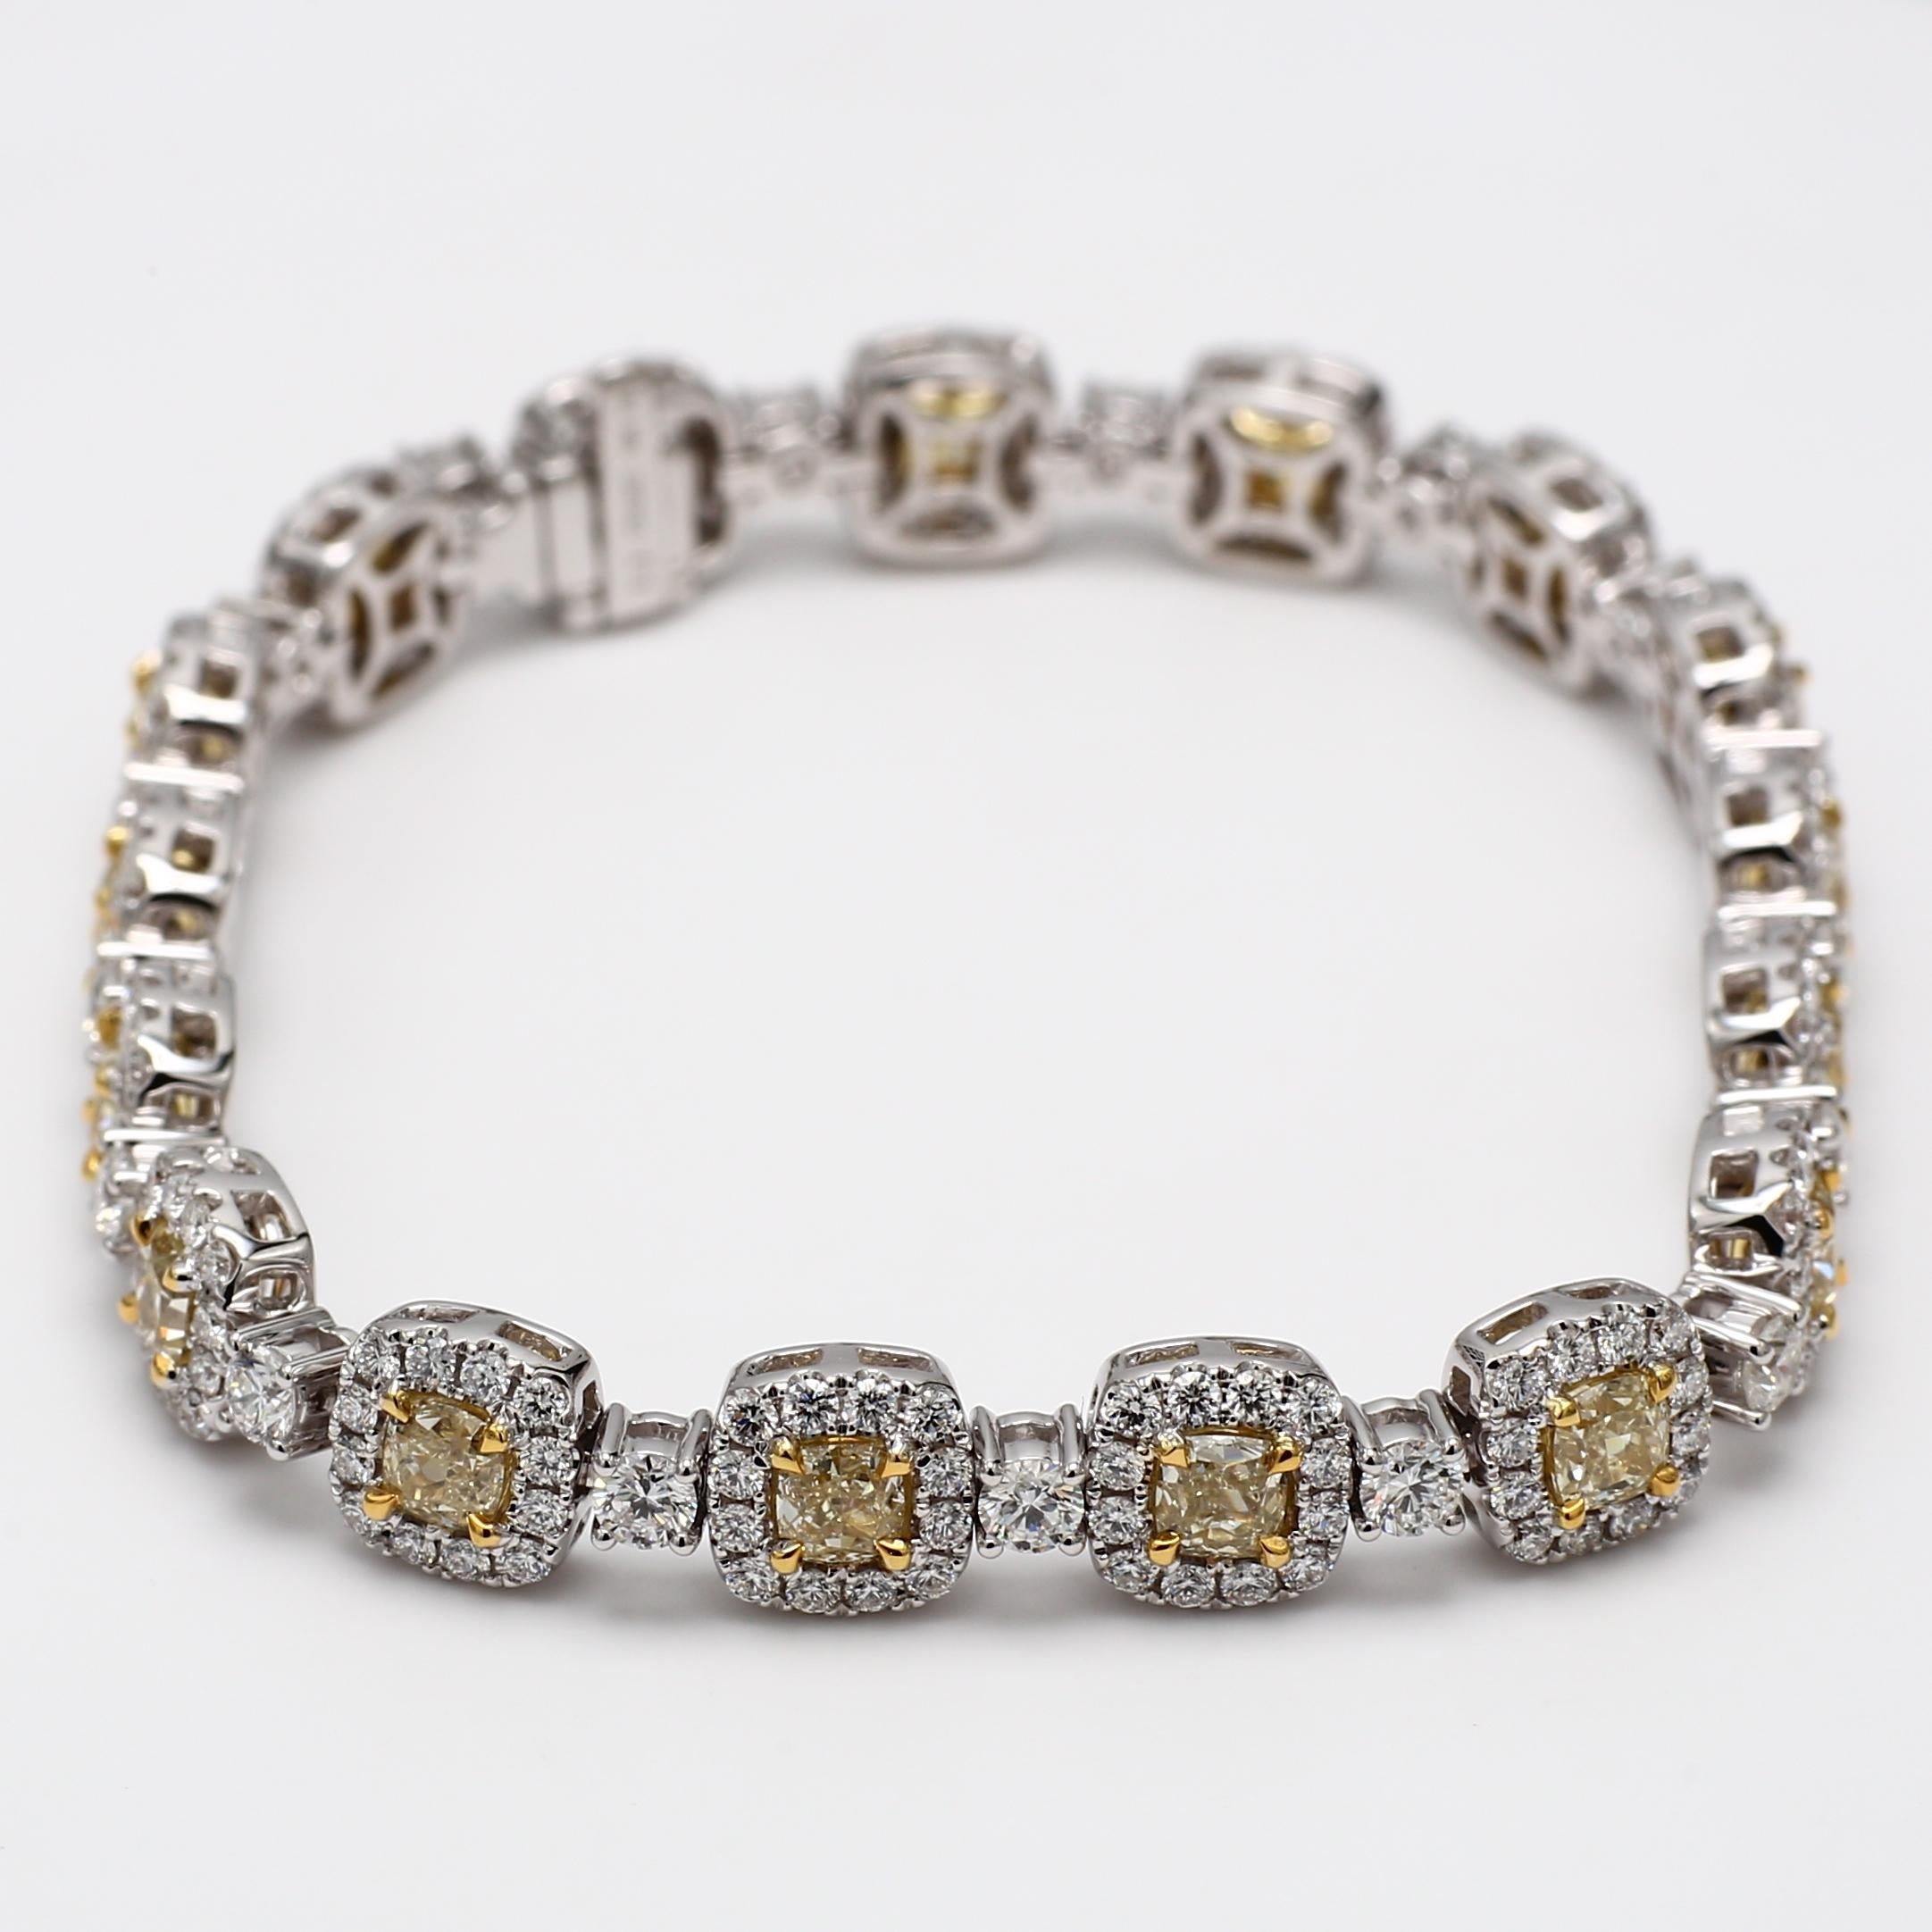 RareGemWorld's classic diamond bracelet. Mounted in a beautiful 18K Yellow and White Gold setting with natural cushion cut yellow diamonds. The yellow diamonds are surrounded by small round natural white diamond melee as well as diamonds continuing